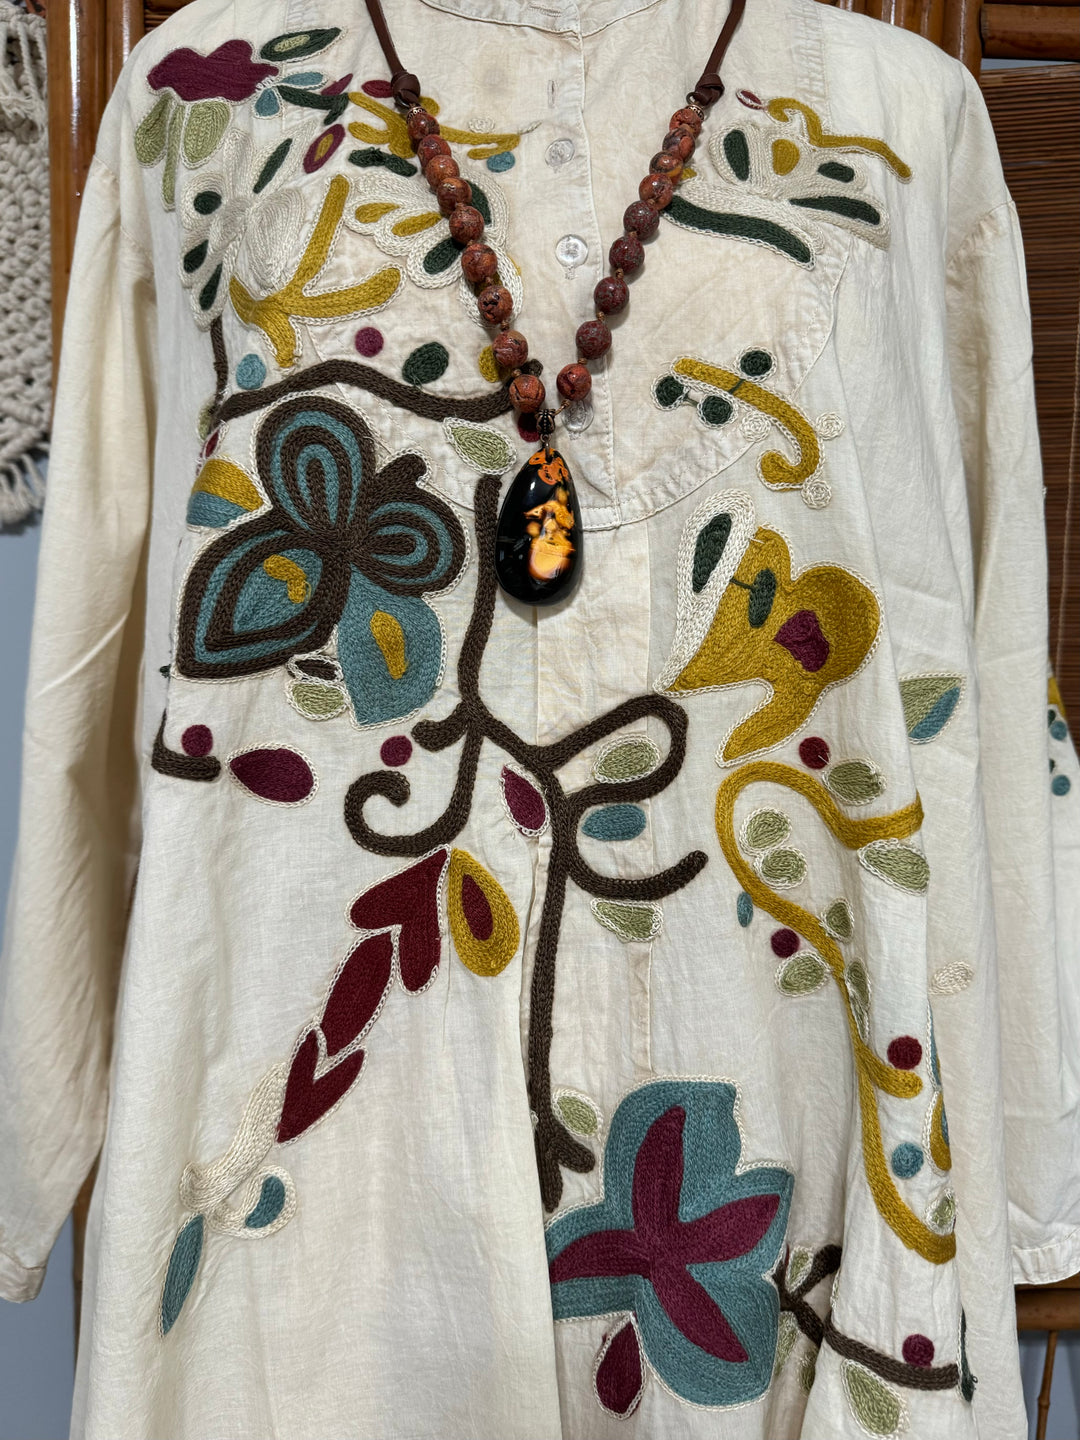 The Johnny Boho Floral Embroidered tunic Hi Lo top